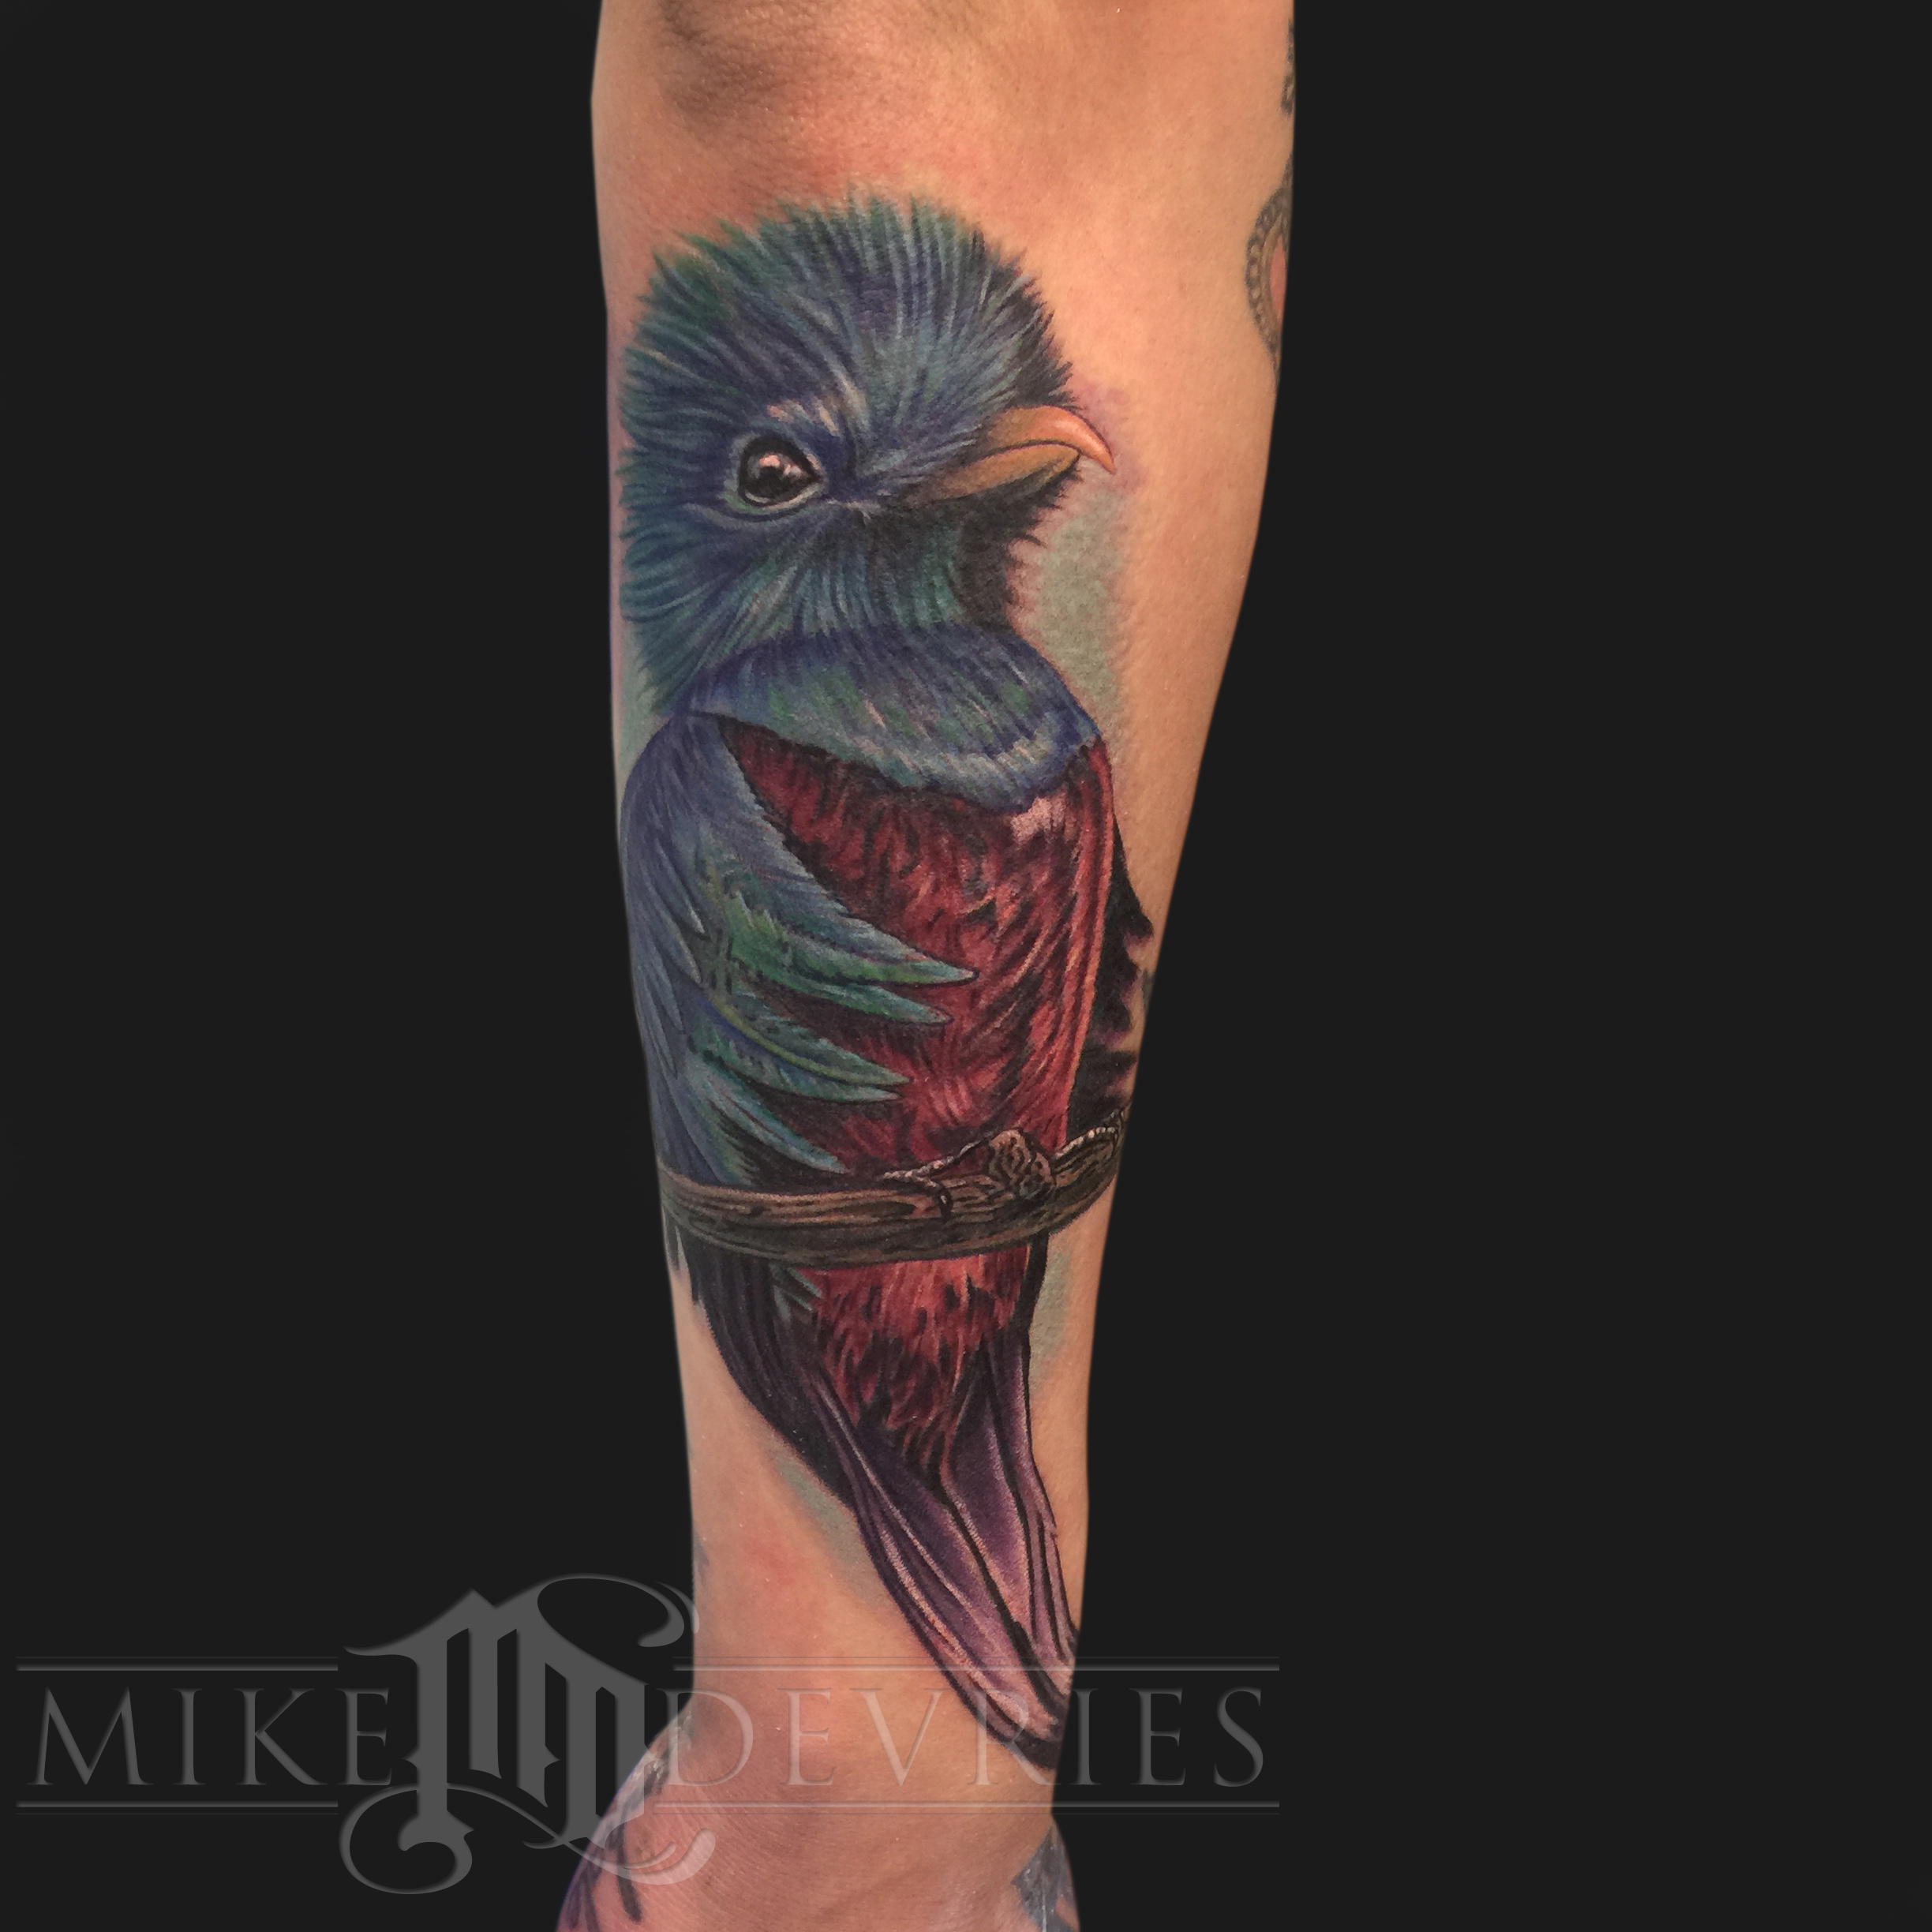 Attractive Quetzel Bird Tattoo On Right Arm By Mike Devries